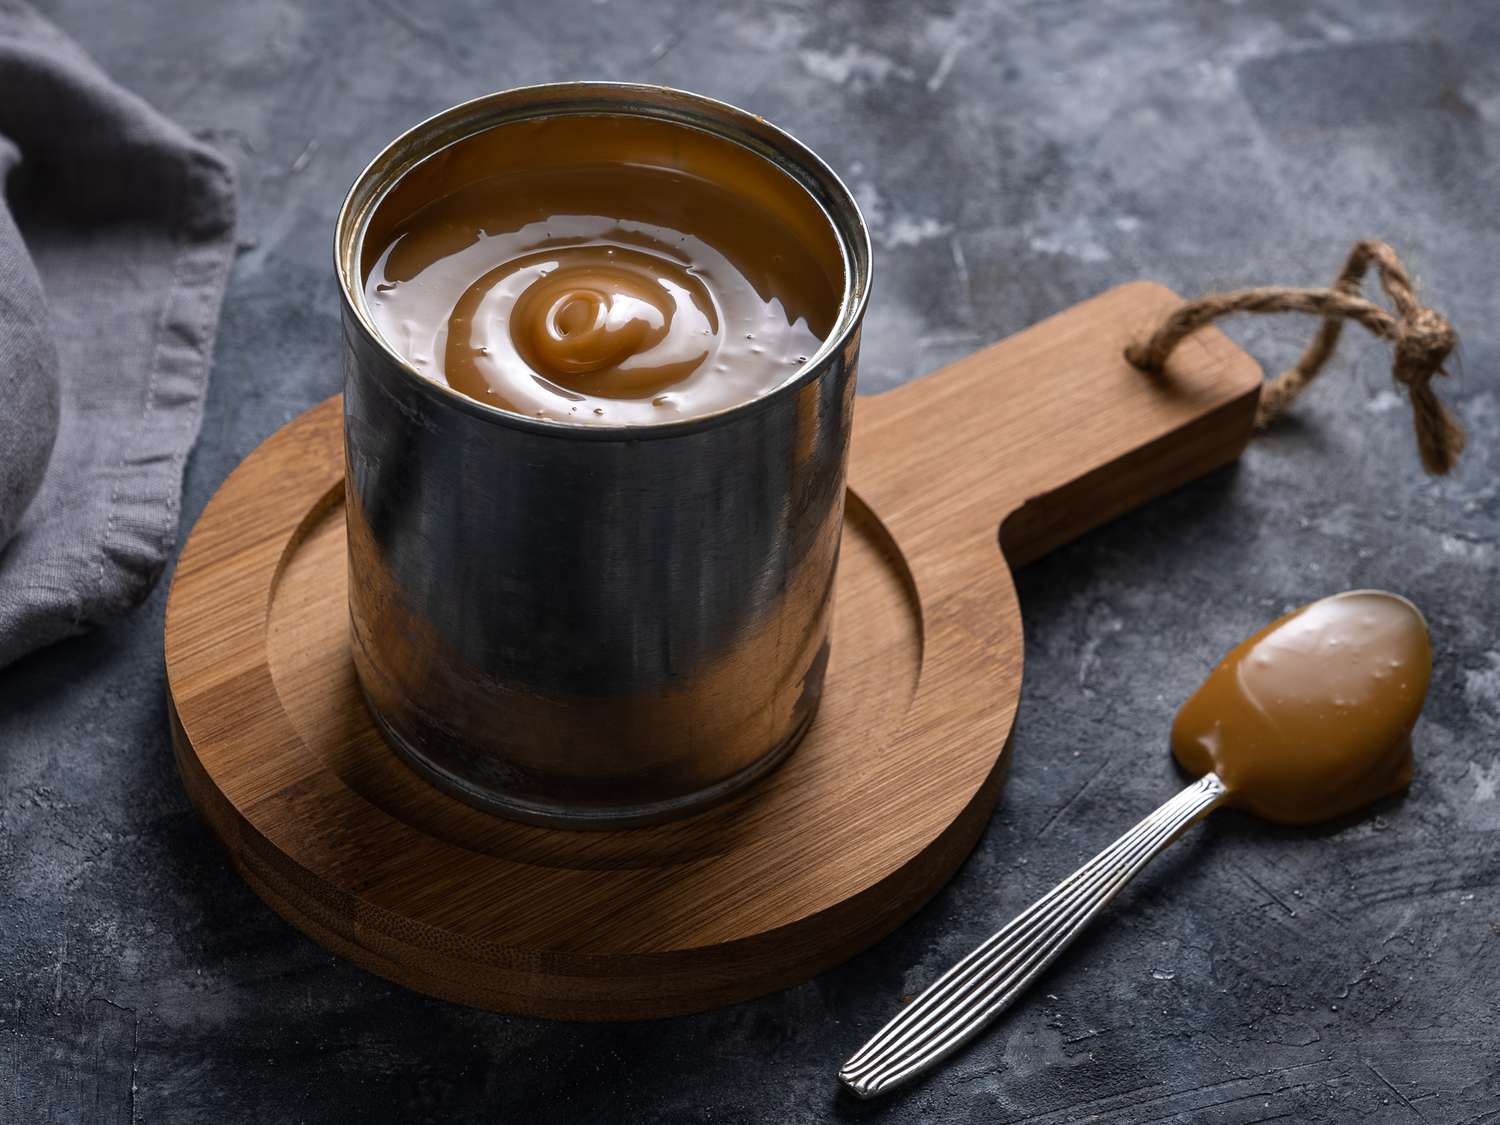 The can of opened dulce de leche on a wooden trivet with a spoon